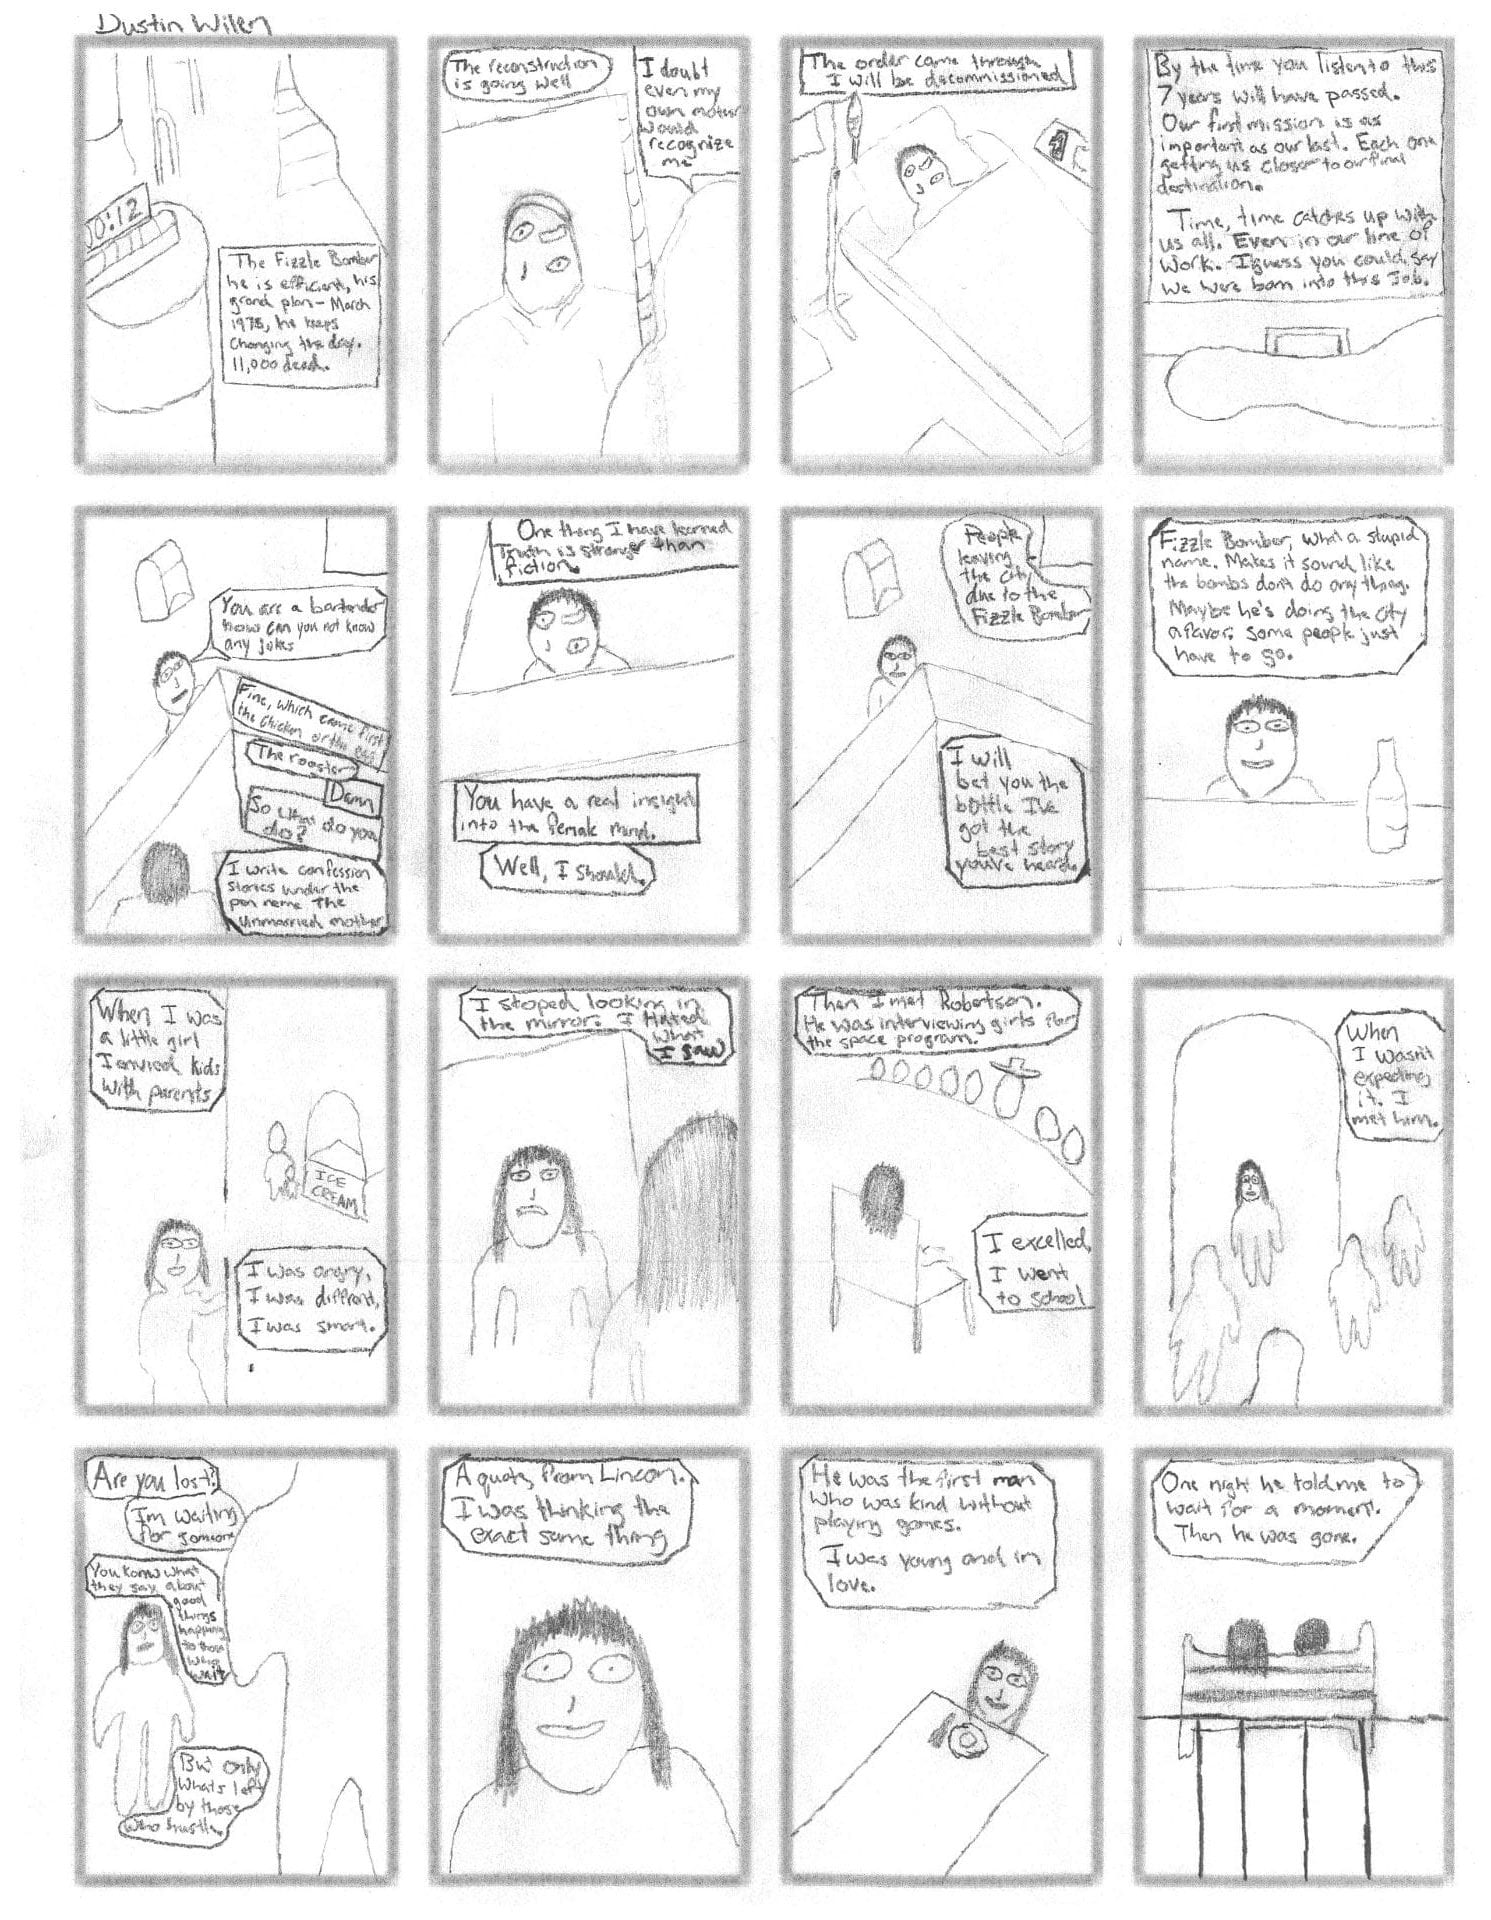 D. Wilen - Comic Page 1 - We watch a person narrating a bomber's warning, and then backstory on growing up in a space program and meeting a guy who leaves without warning.